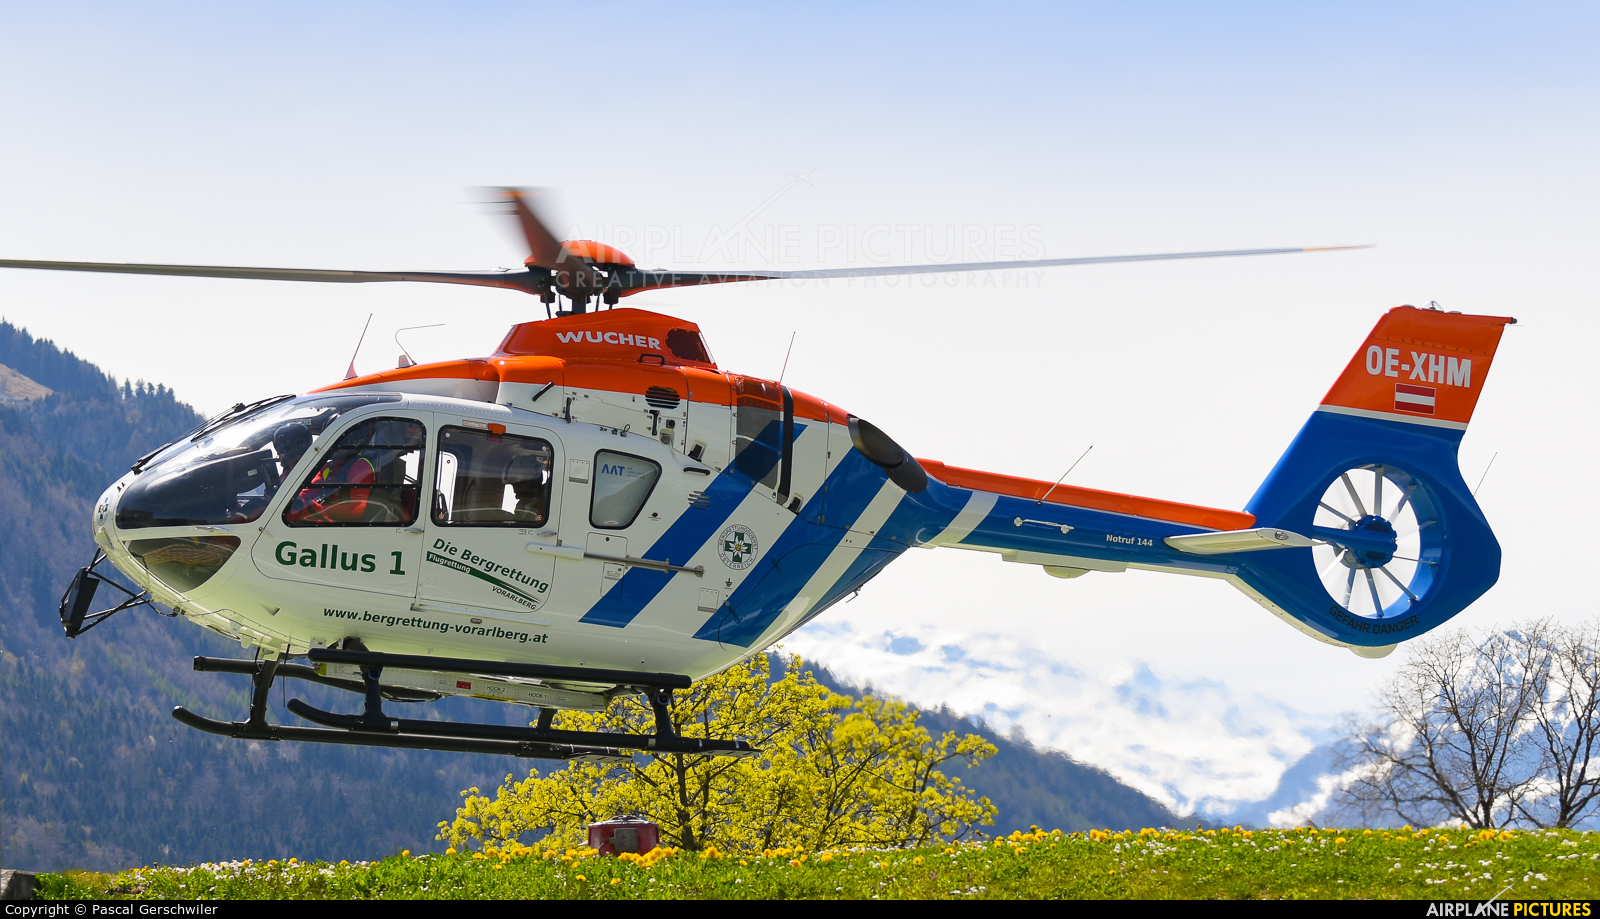 Wucher Helicopter OE-XHM aircraft at Off Airport - Austria